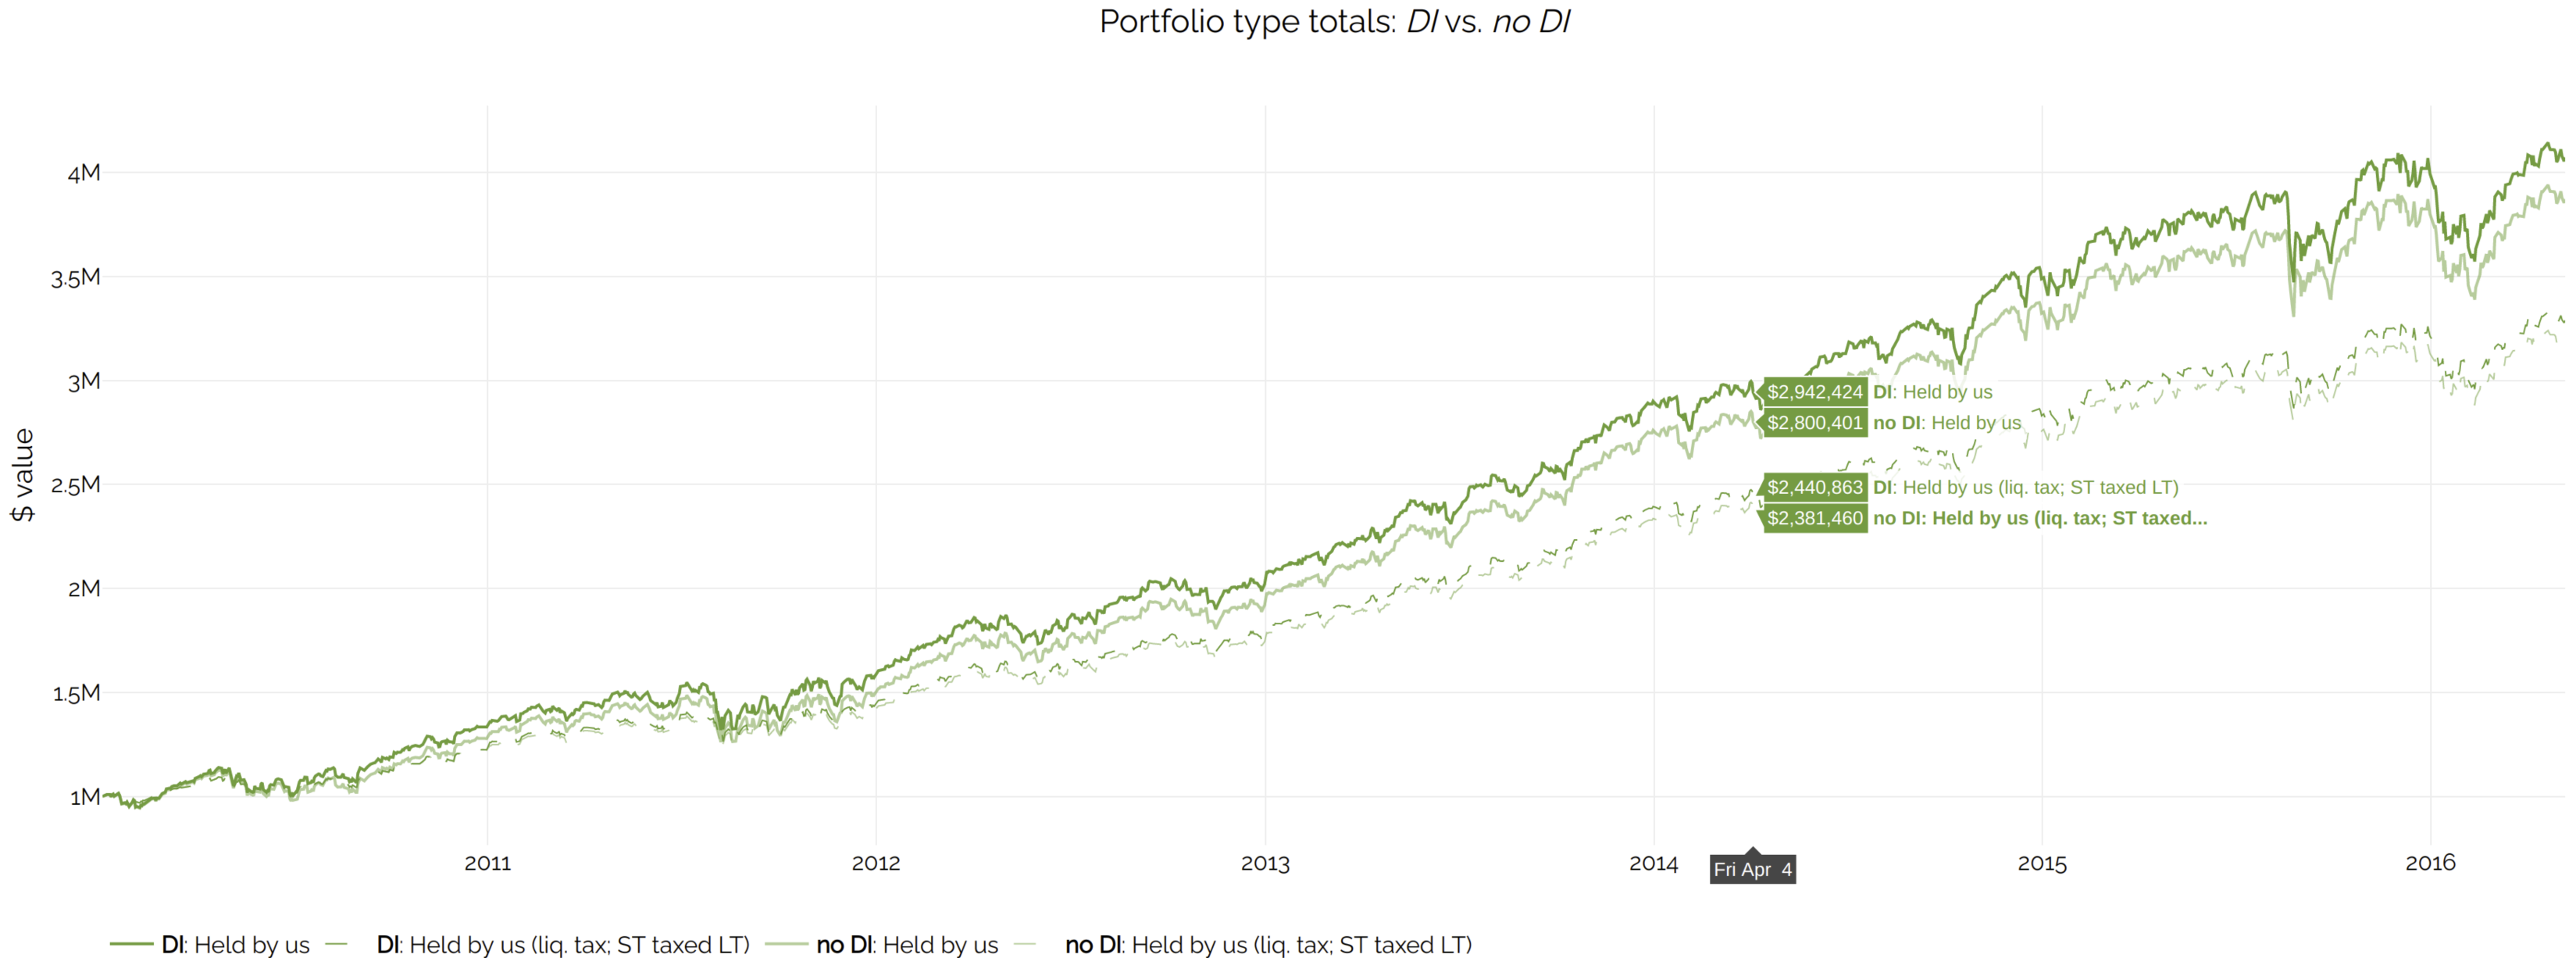 Portfolio values, before and after tax, with and without DI